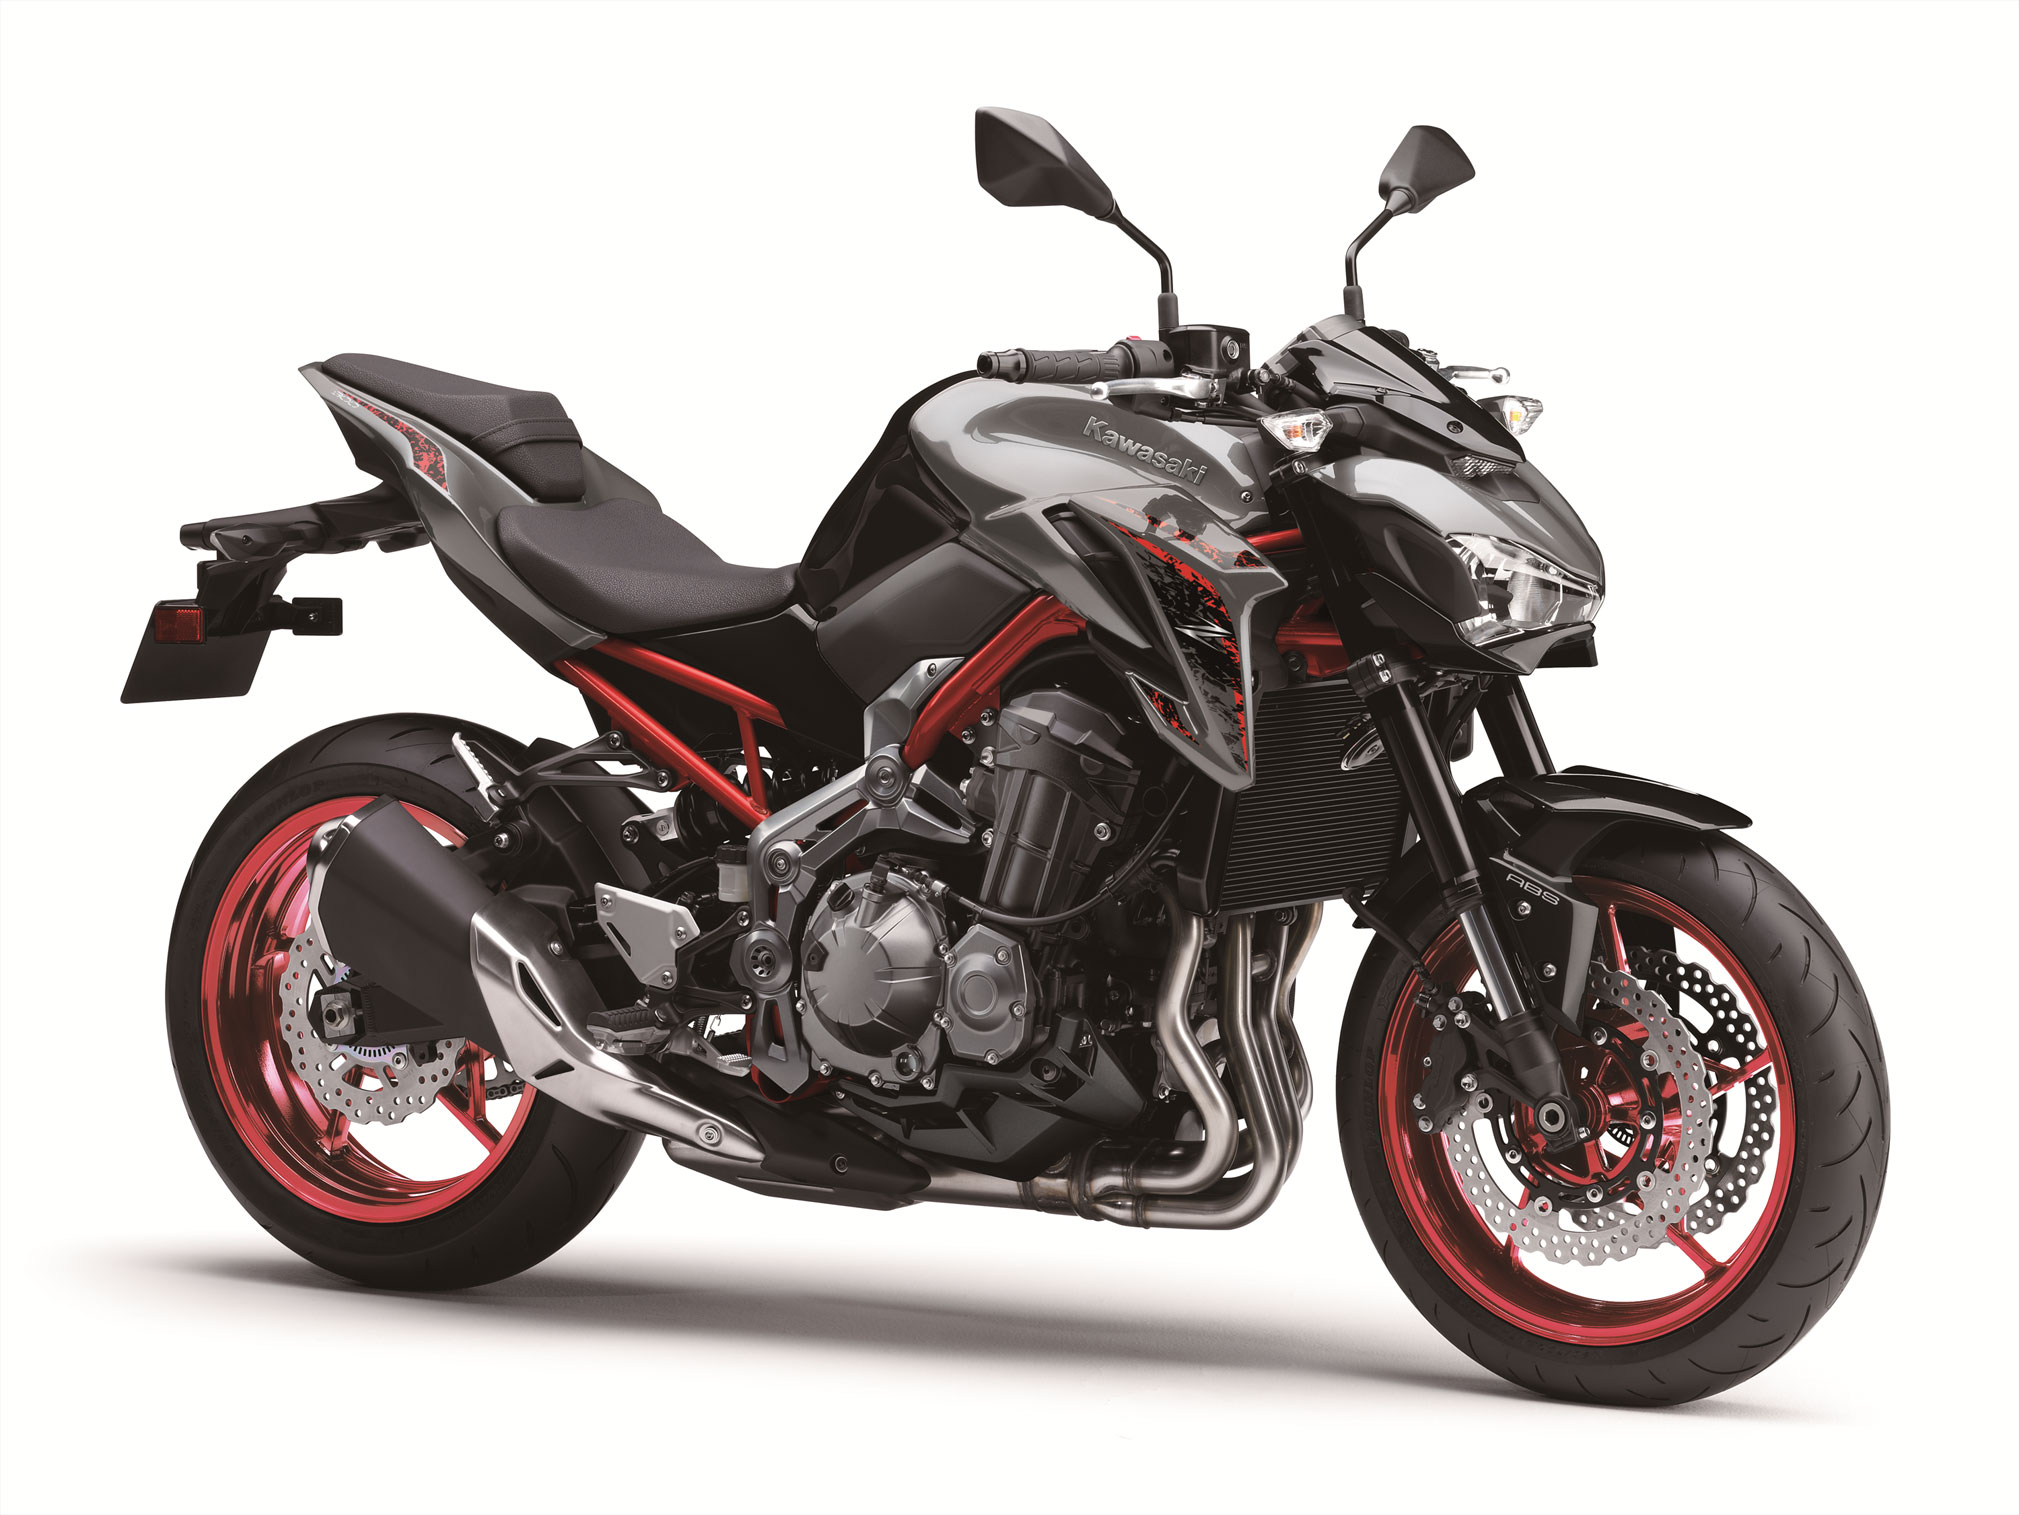 2019 Z900 ABS Guide • Total Motorcycle